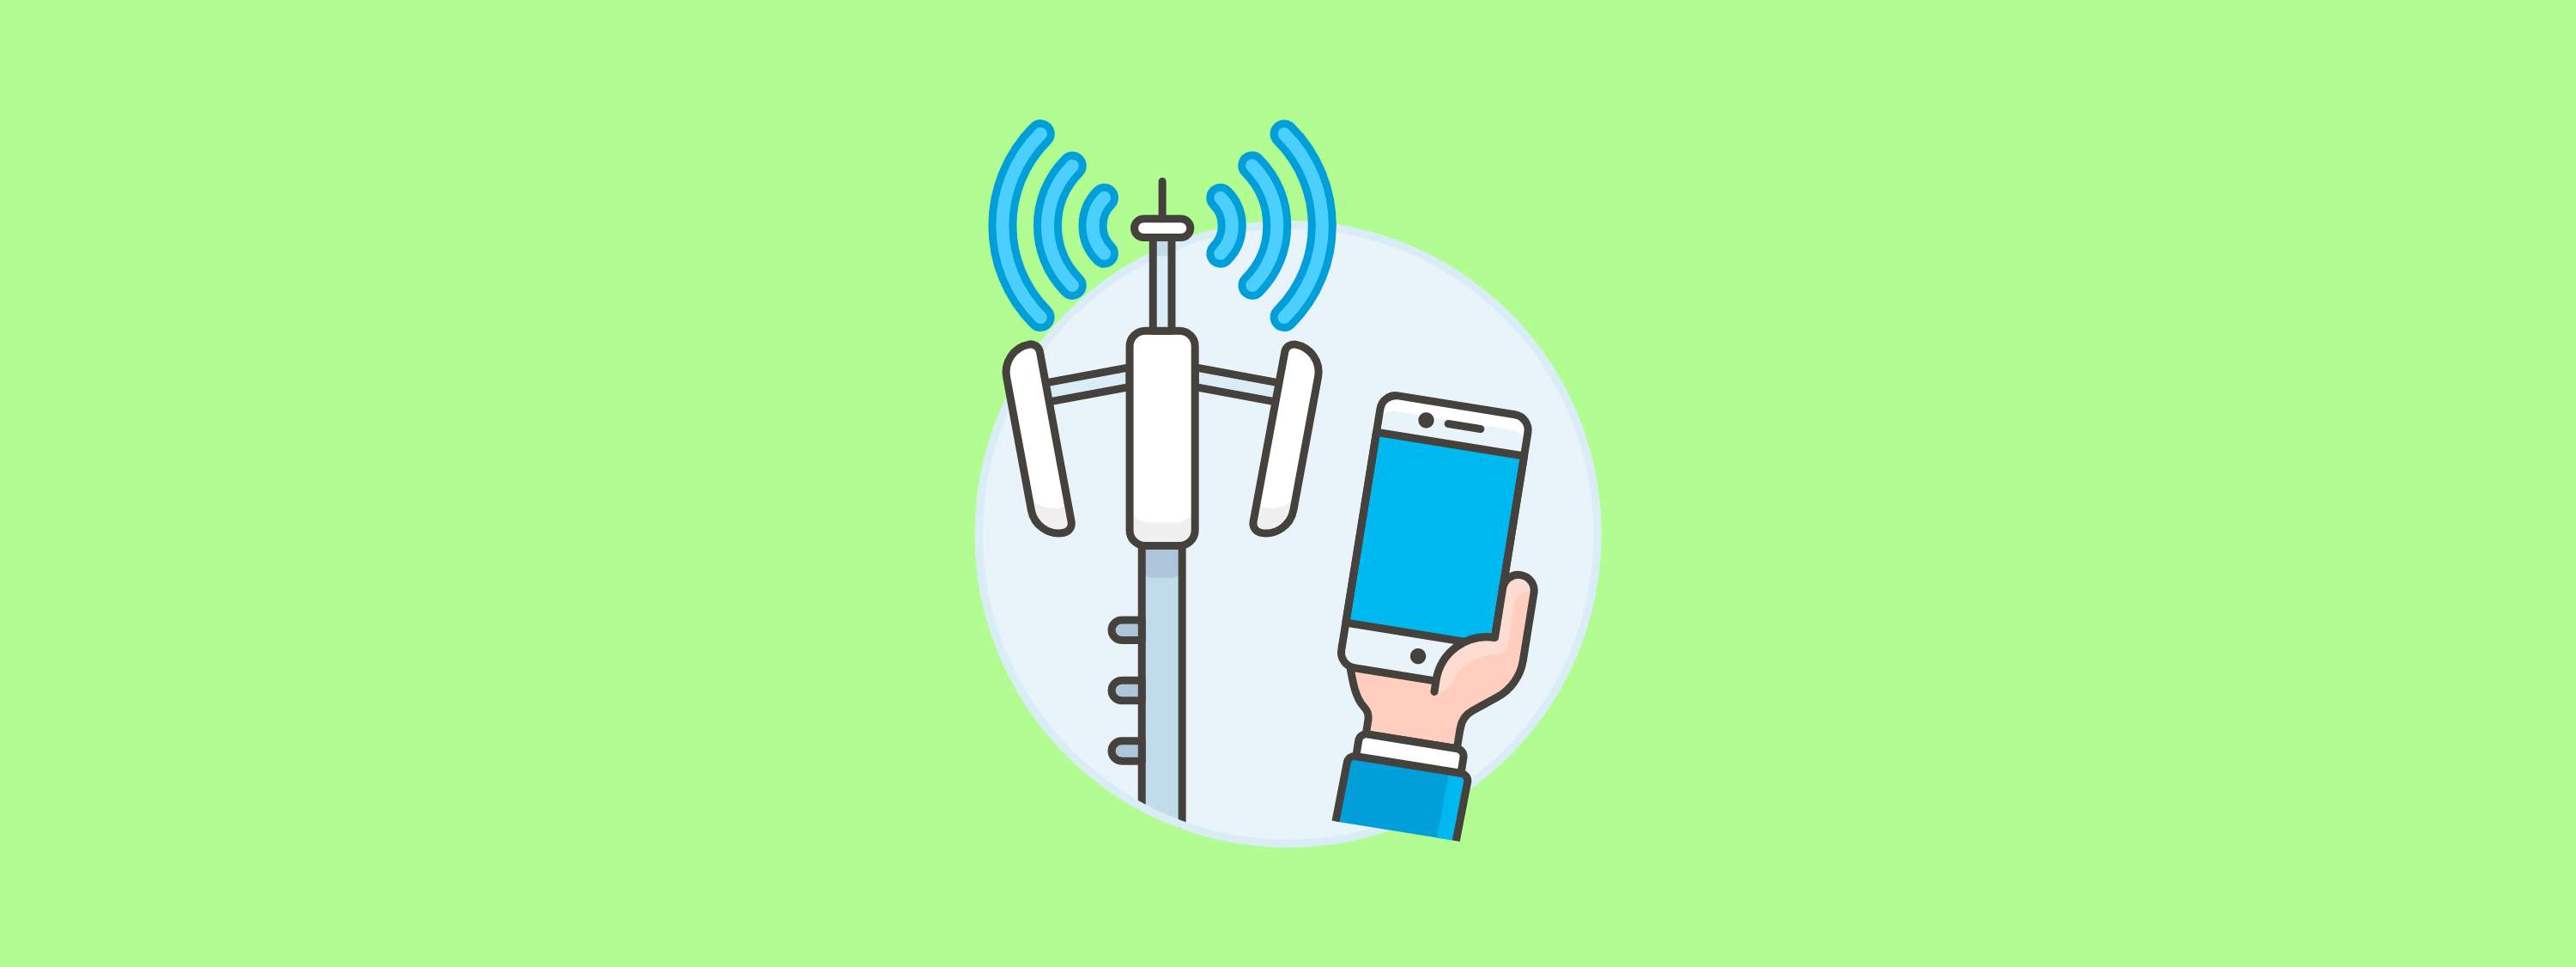 Image of a graphic icon of a hand holding a smart phone in front of a wifi tower.